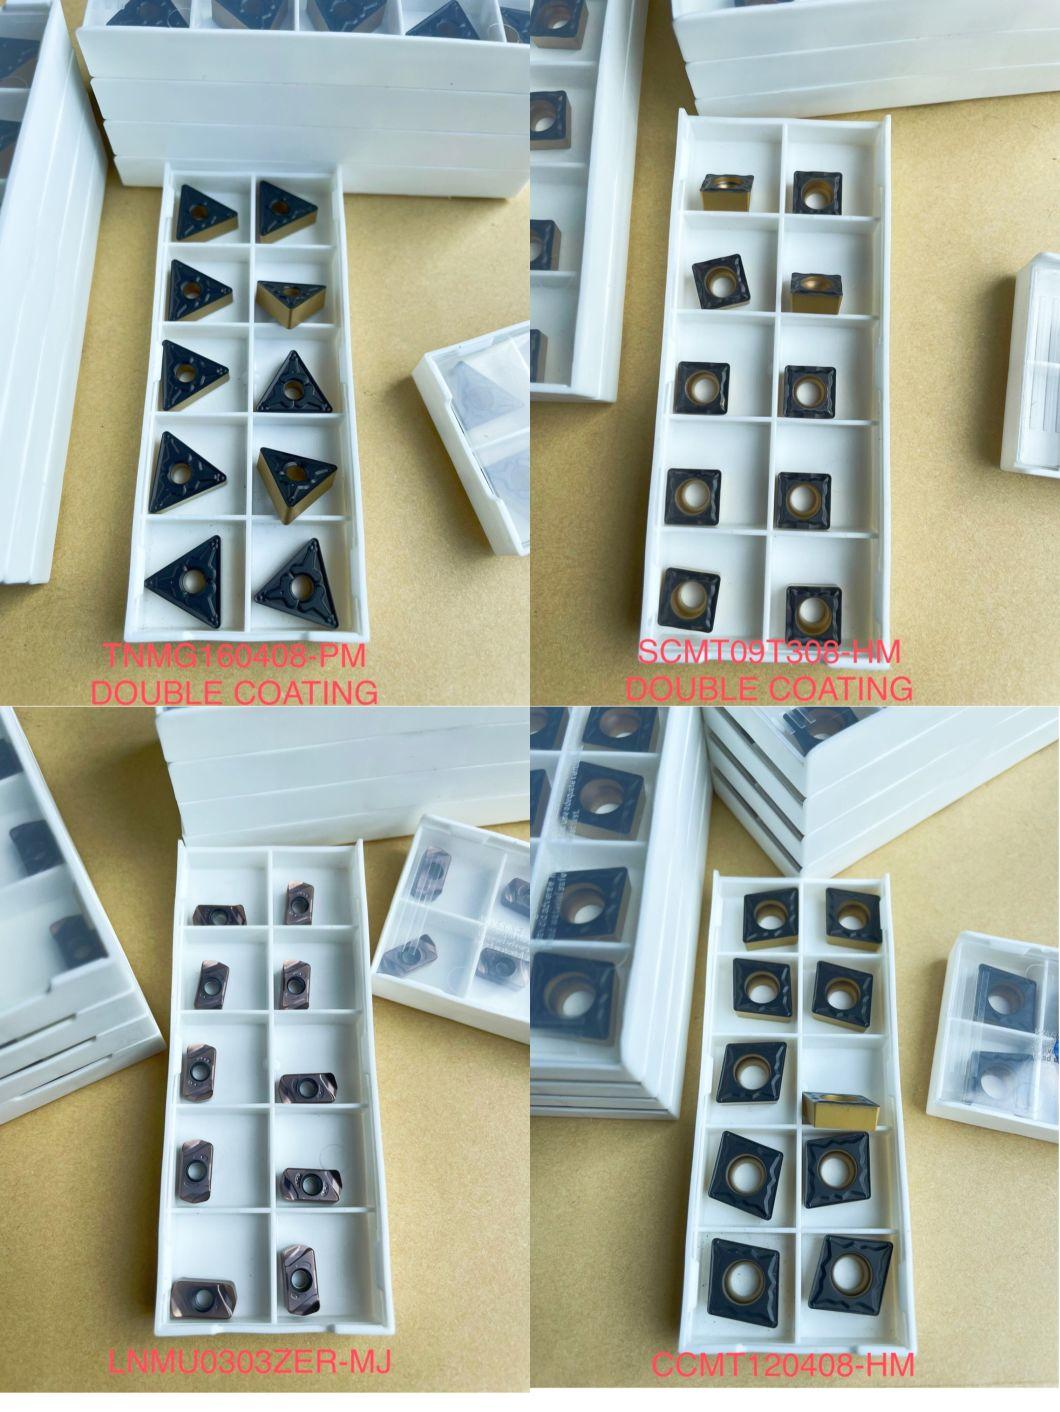 Original Product CNC Lathe Turning Tools Carbide Insert Tcmt Series for Steel Parts